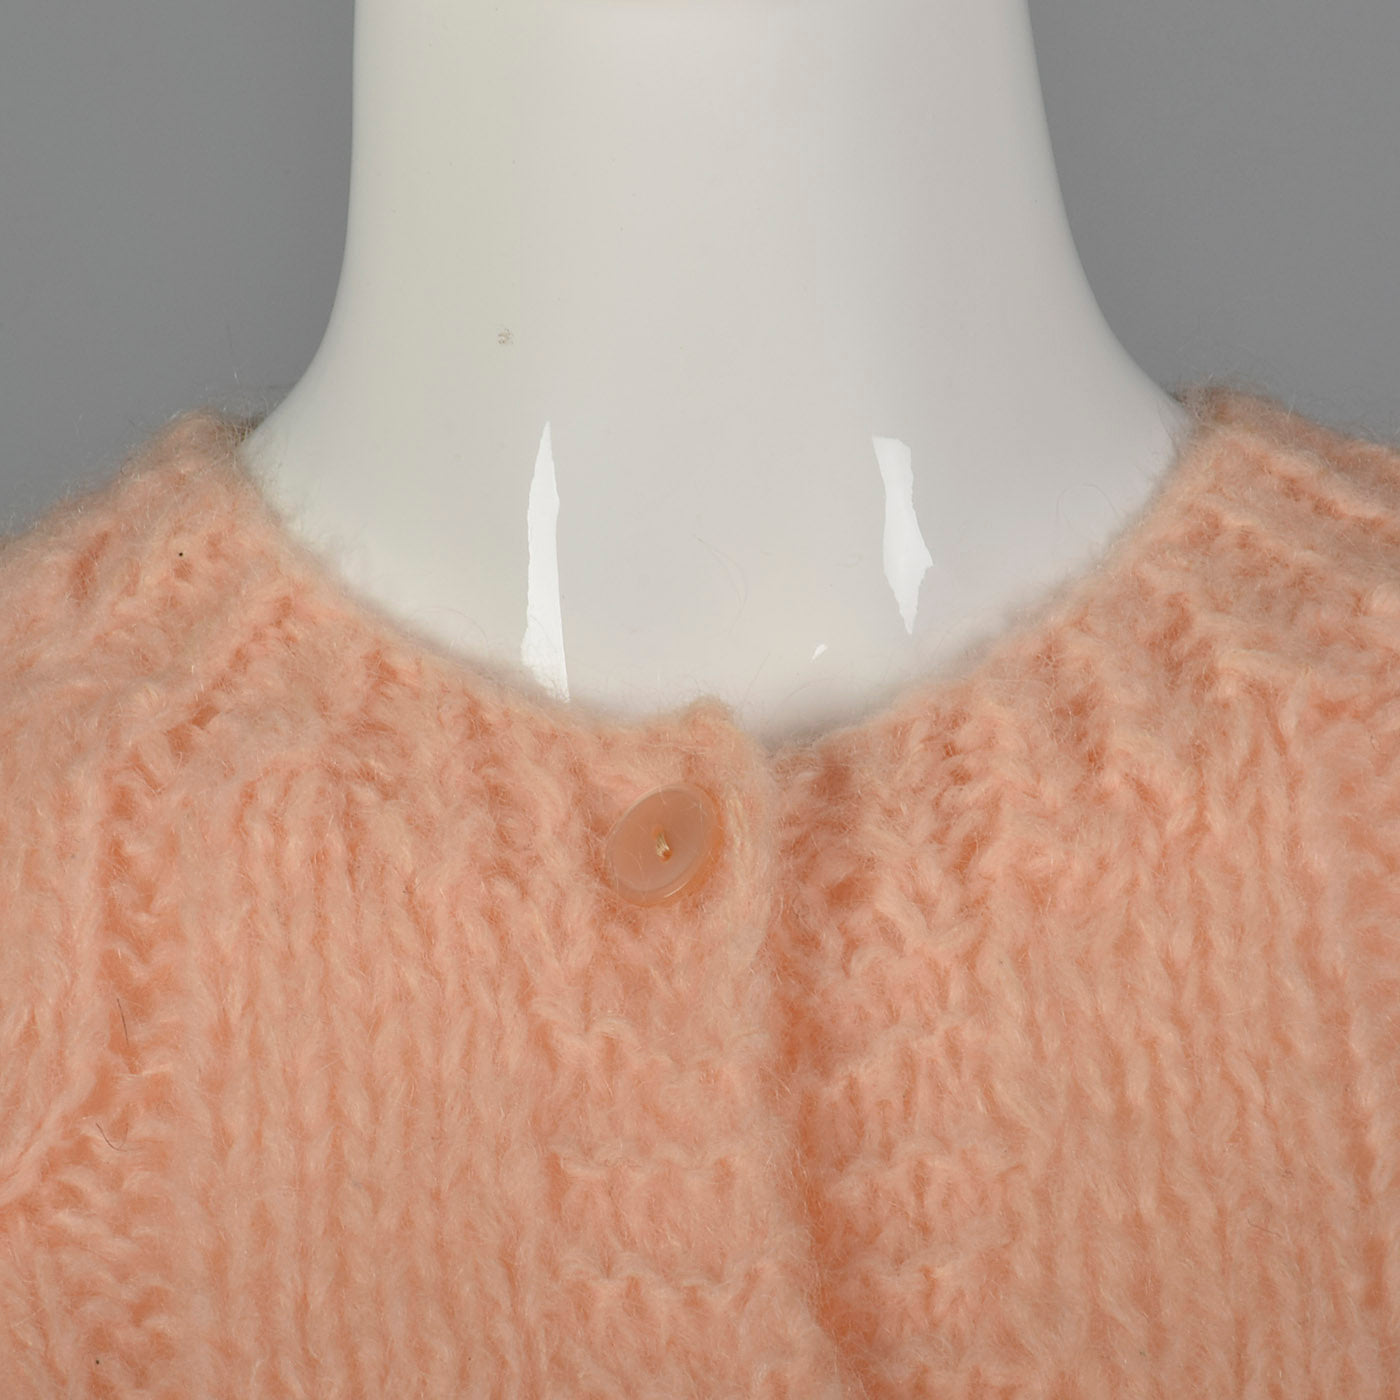 1960s Oh-So-Soft Pink Cardigan